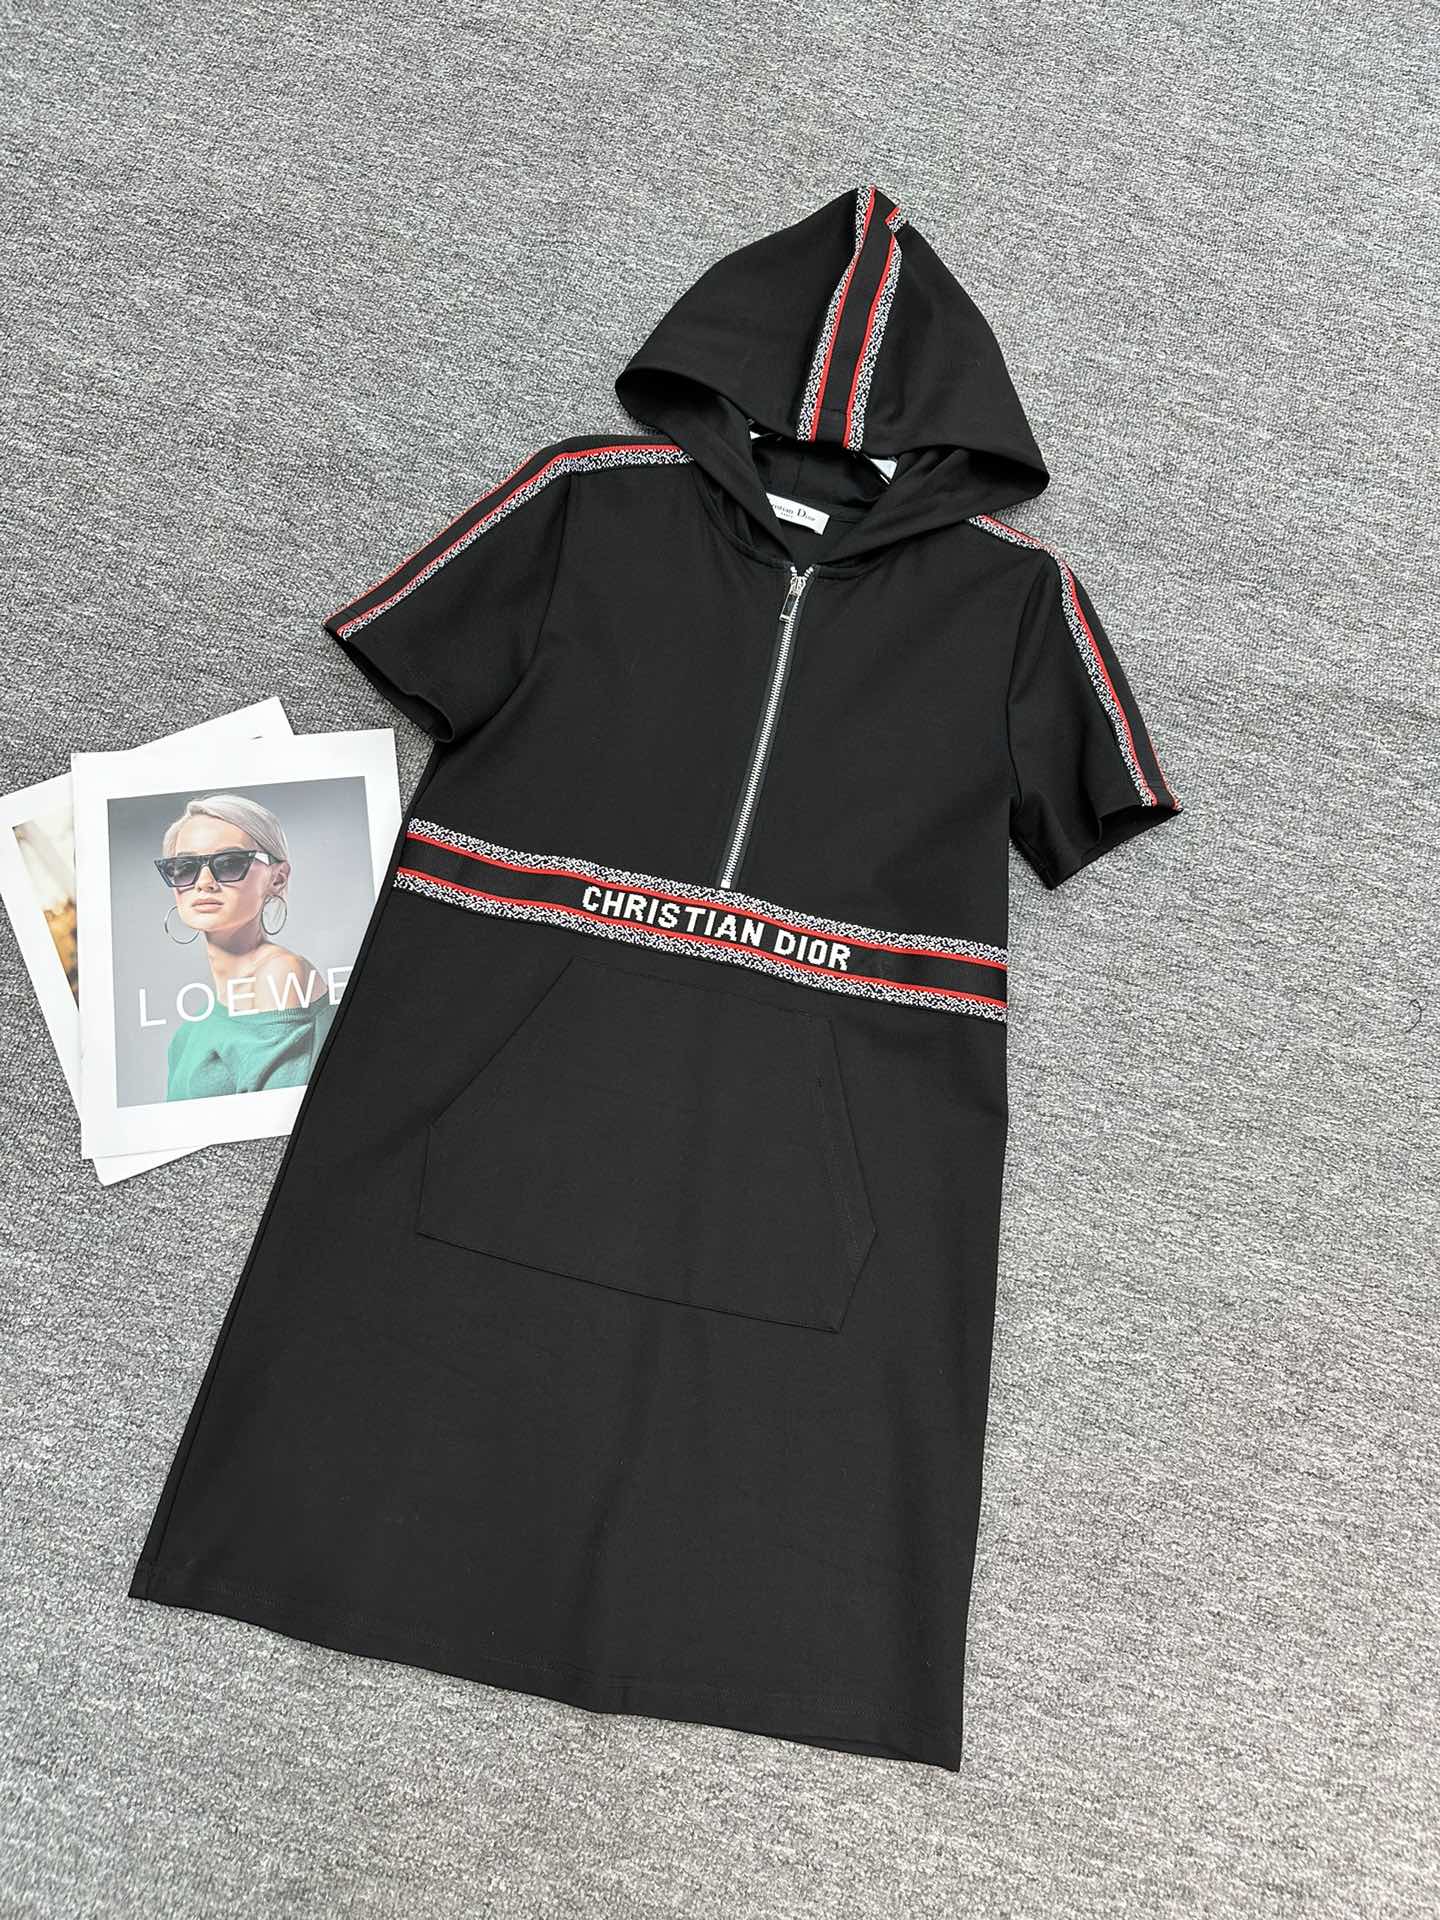 Dior Clothing Dresses Spring Collection Hooded Top